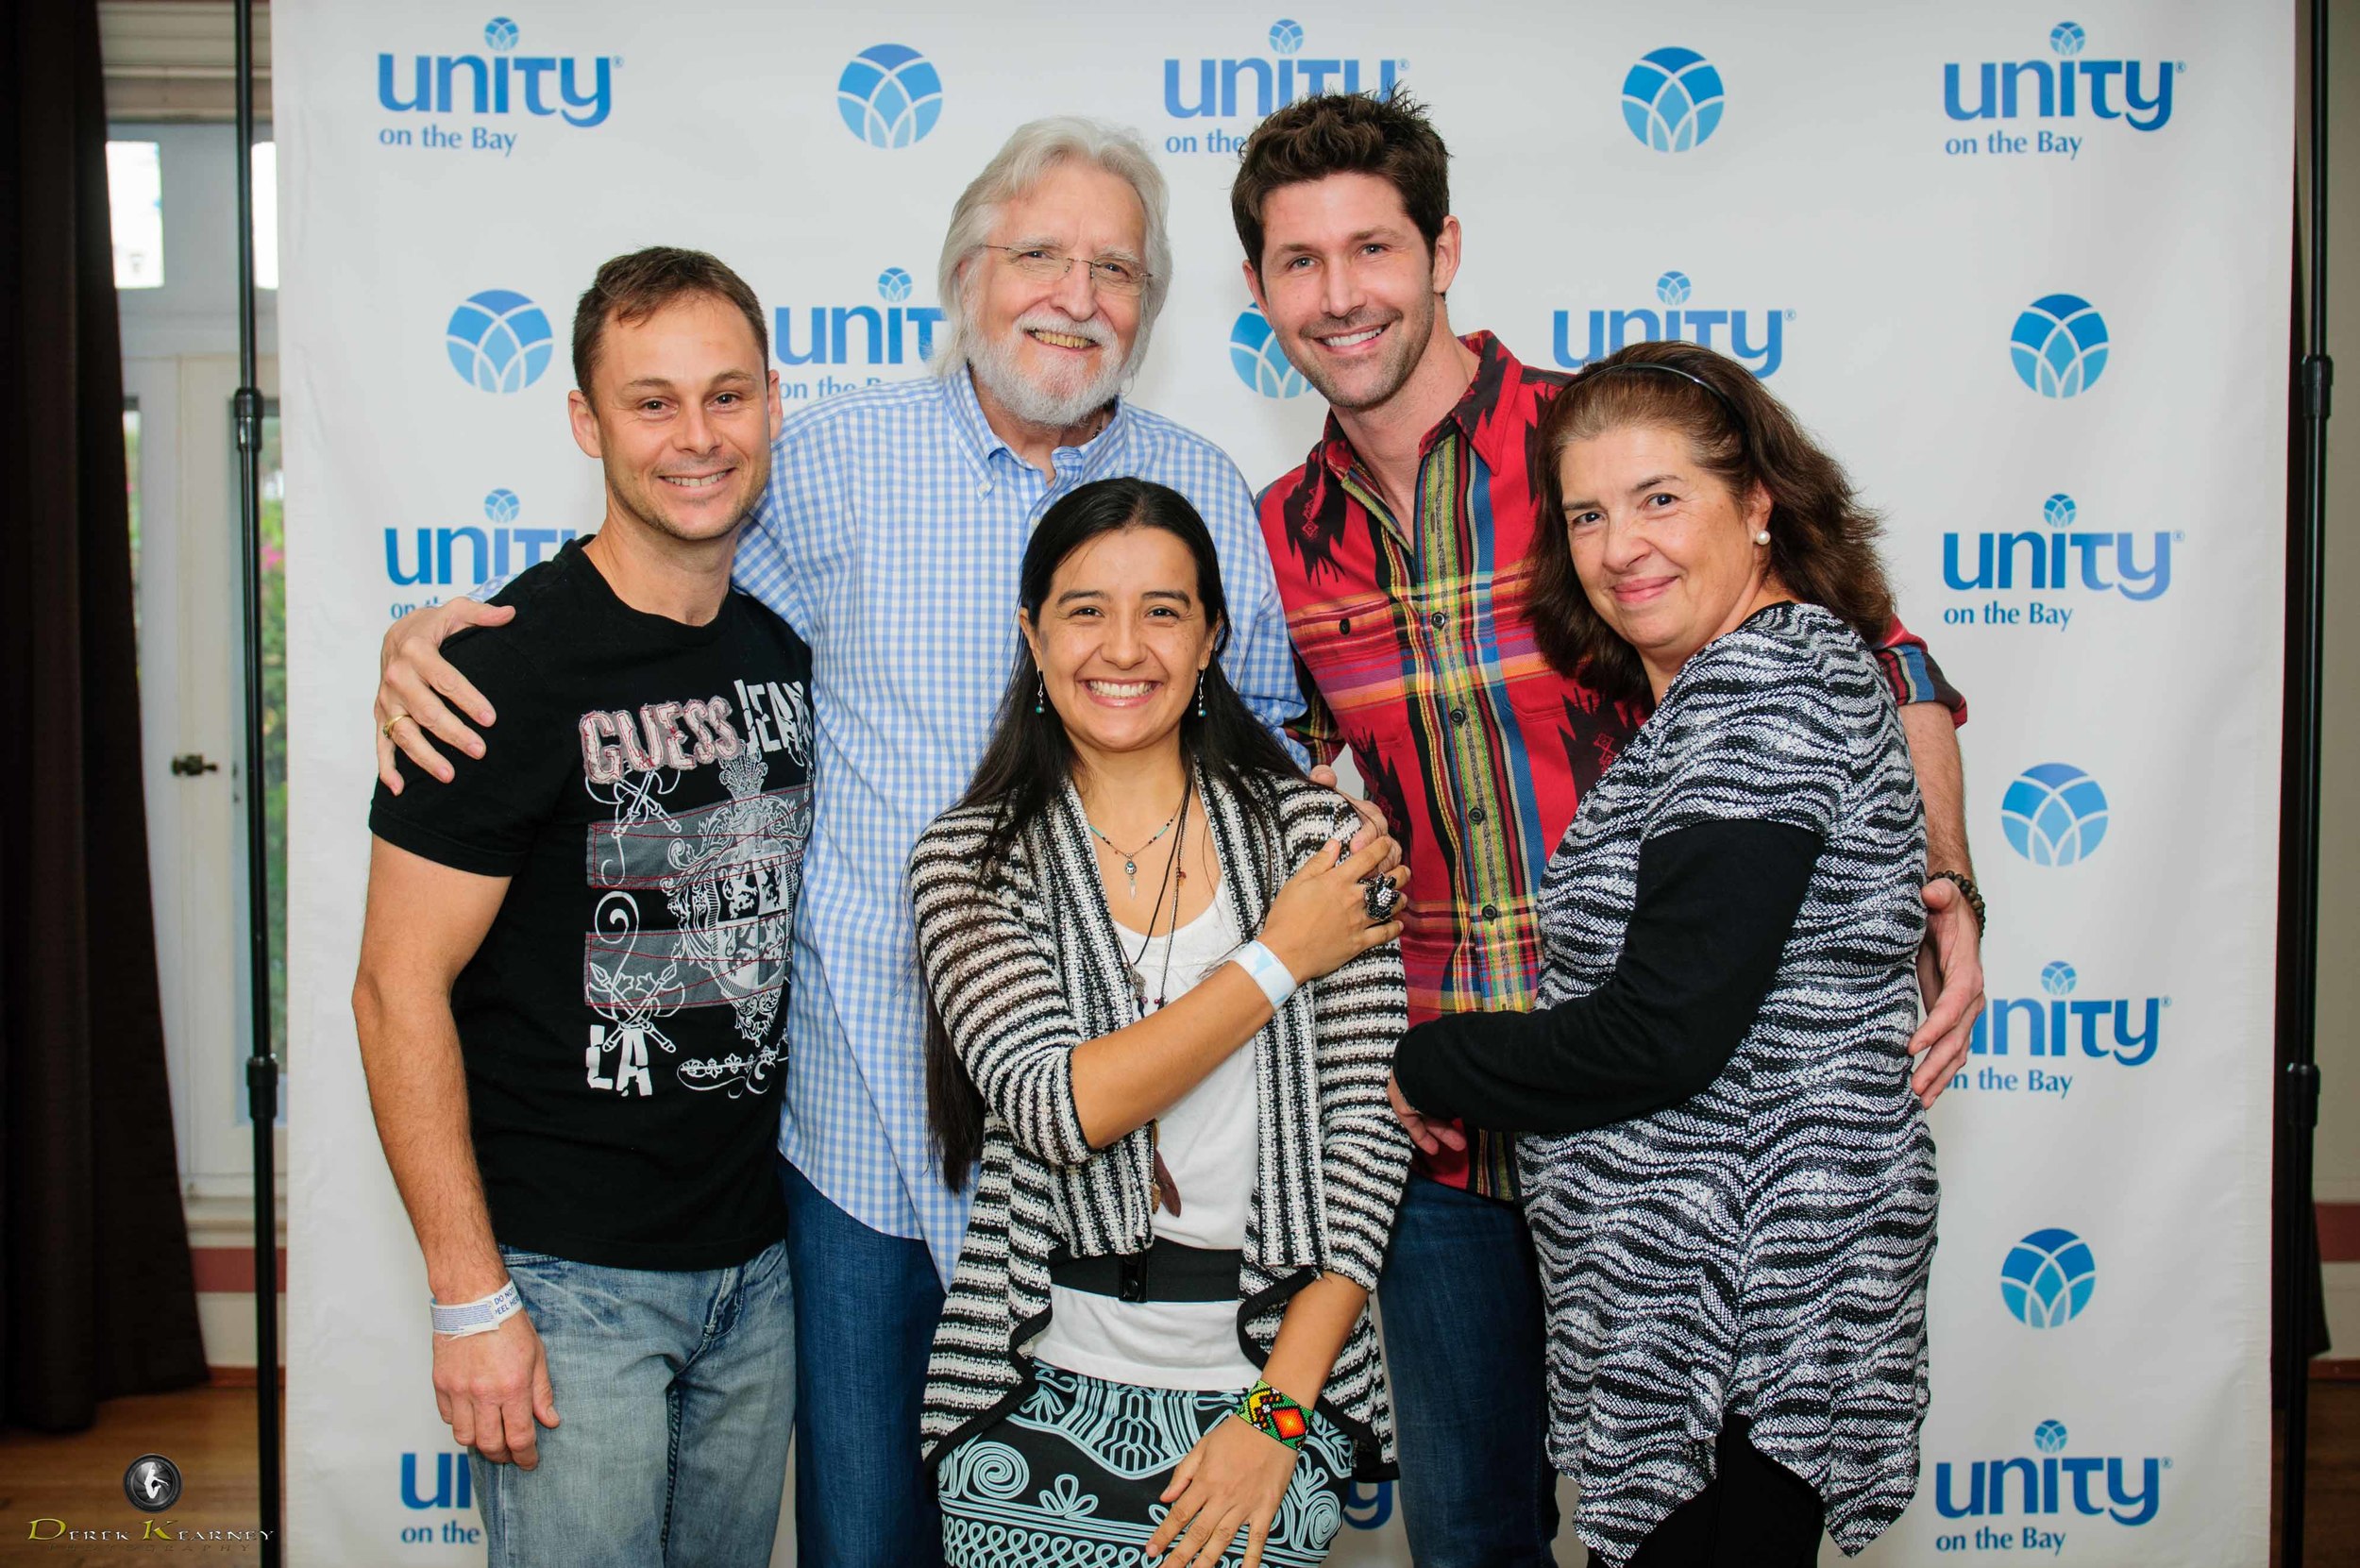 Against the will Teacher's day tar 2015 Neale Walsch — Unity on the Bay